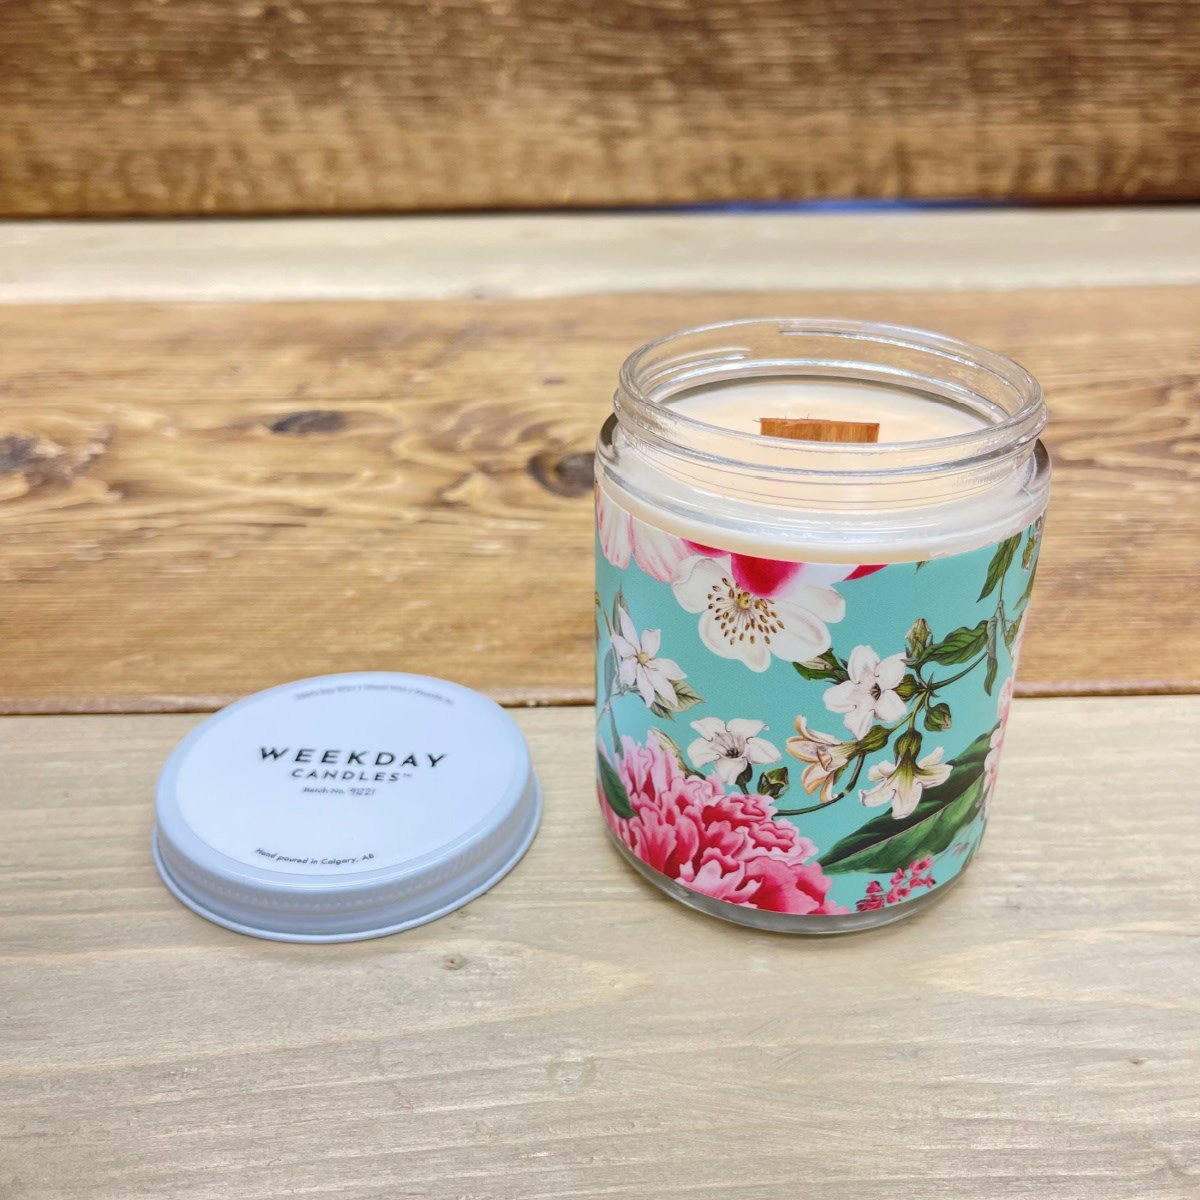 Weekday Candles Blossom